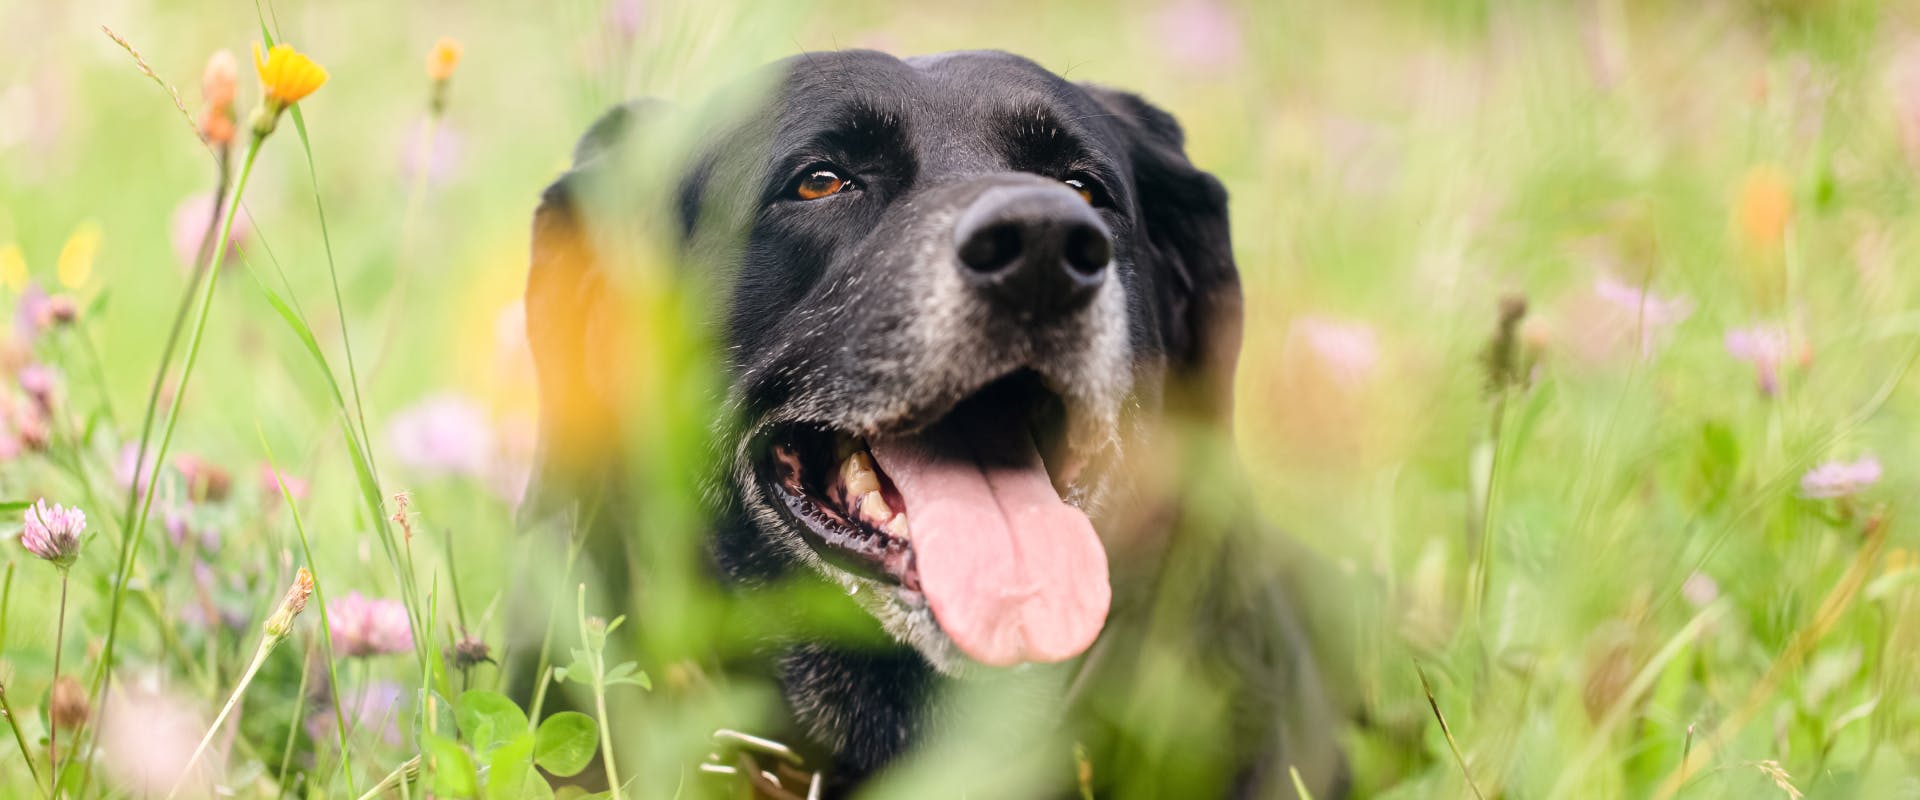 an elderly black dog lying in a field of long grass and wild flowers